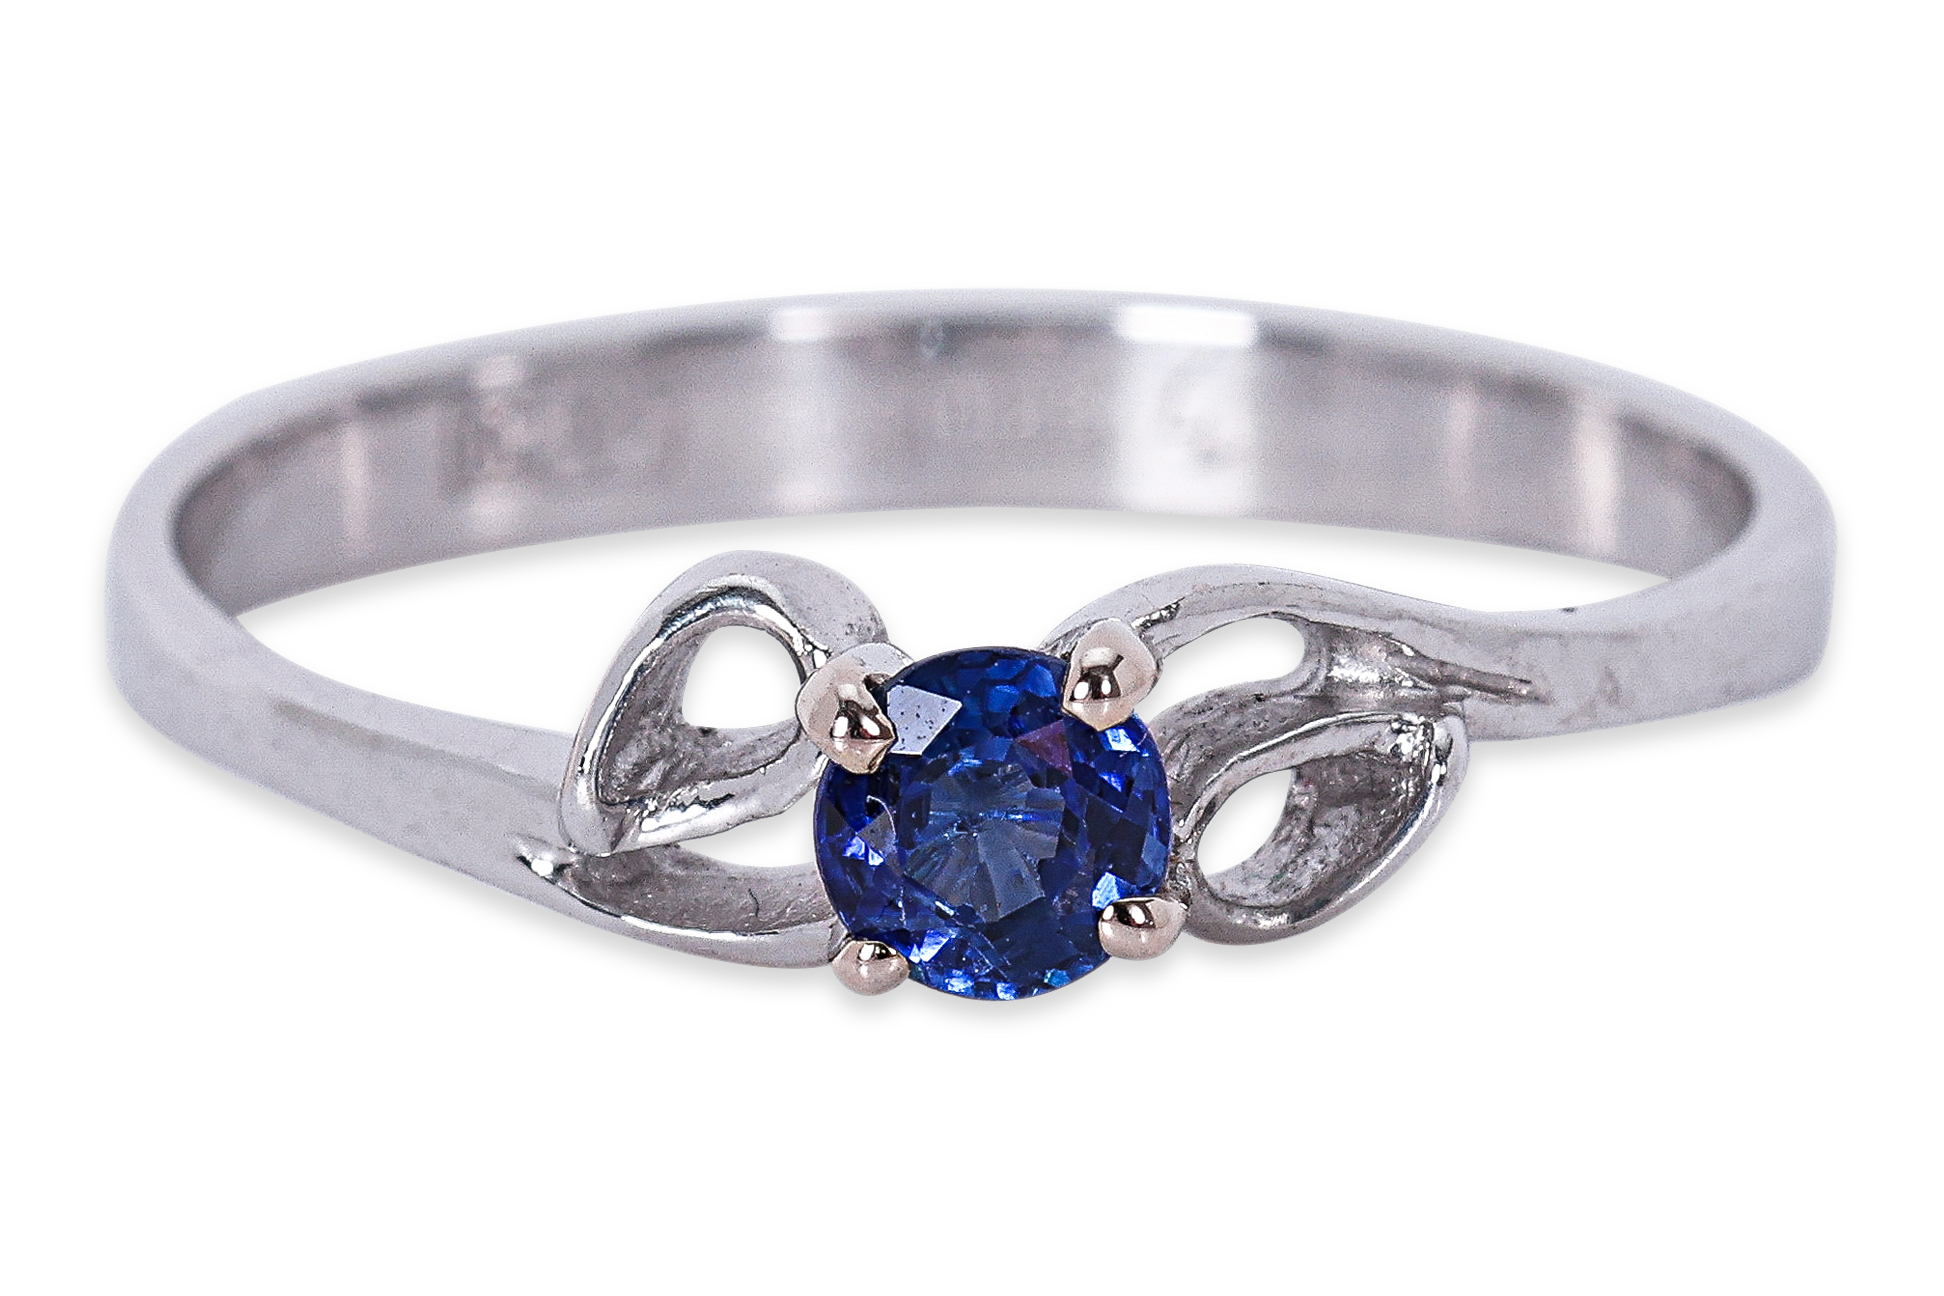 A SOVIET BLUE SAPPHIRE RING - Image 2 of 4